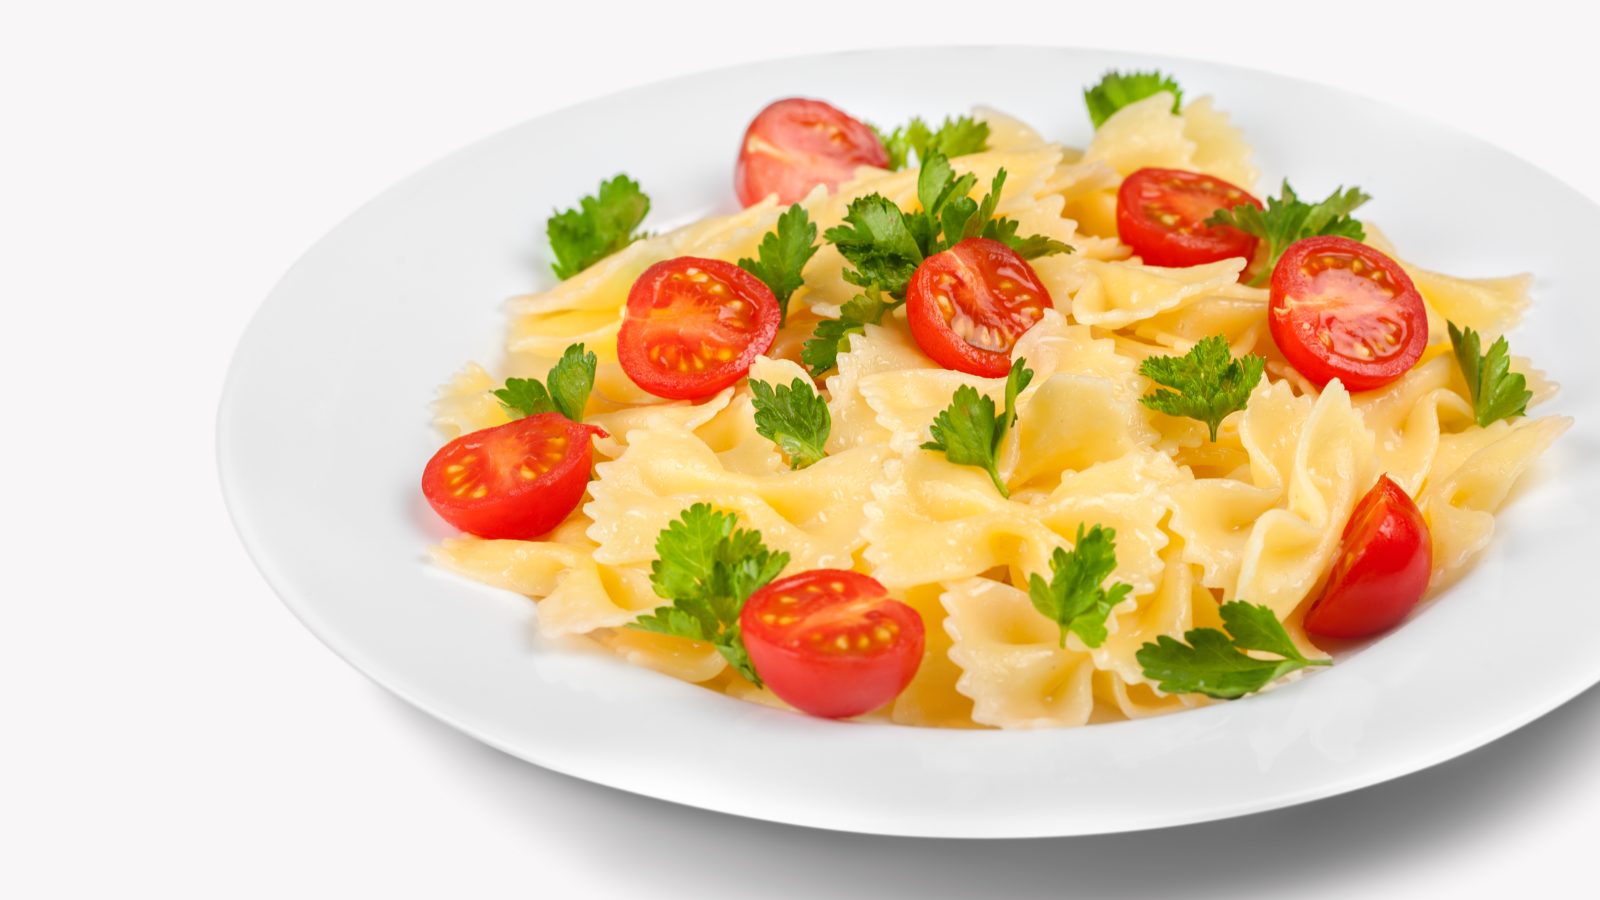 Bean pasta with tomatoes and a light sauce.  A healthy meal idea for diabetes prevention or prediabetes